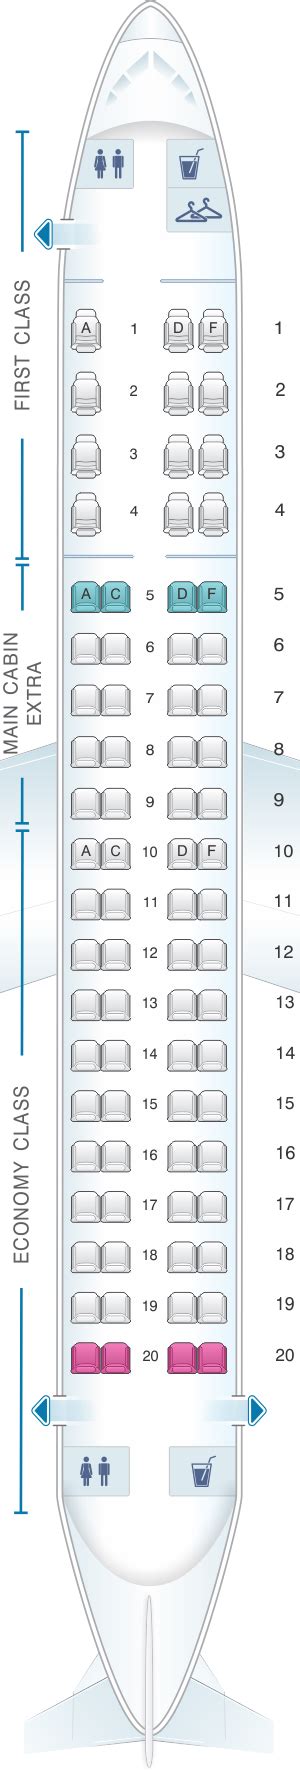 The Delta Airlines A321neo seat map for the Economy class features standard rows from the 15th to the 39th. There are no windows in the reserved seats 18A and 18F, and there is no floor storage beneath 14D. The seats are configured with a pitch of approximately 31-32 inches. It is the distance between a point on one seat and the same point on .... 